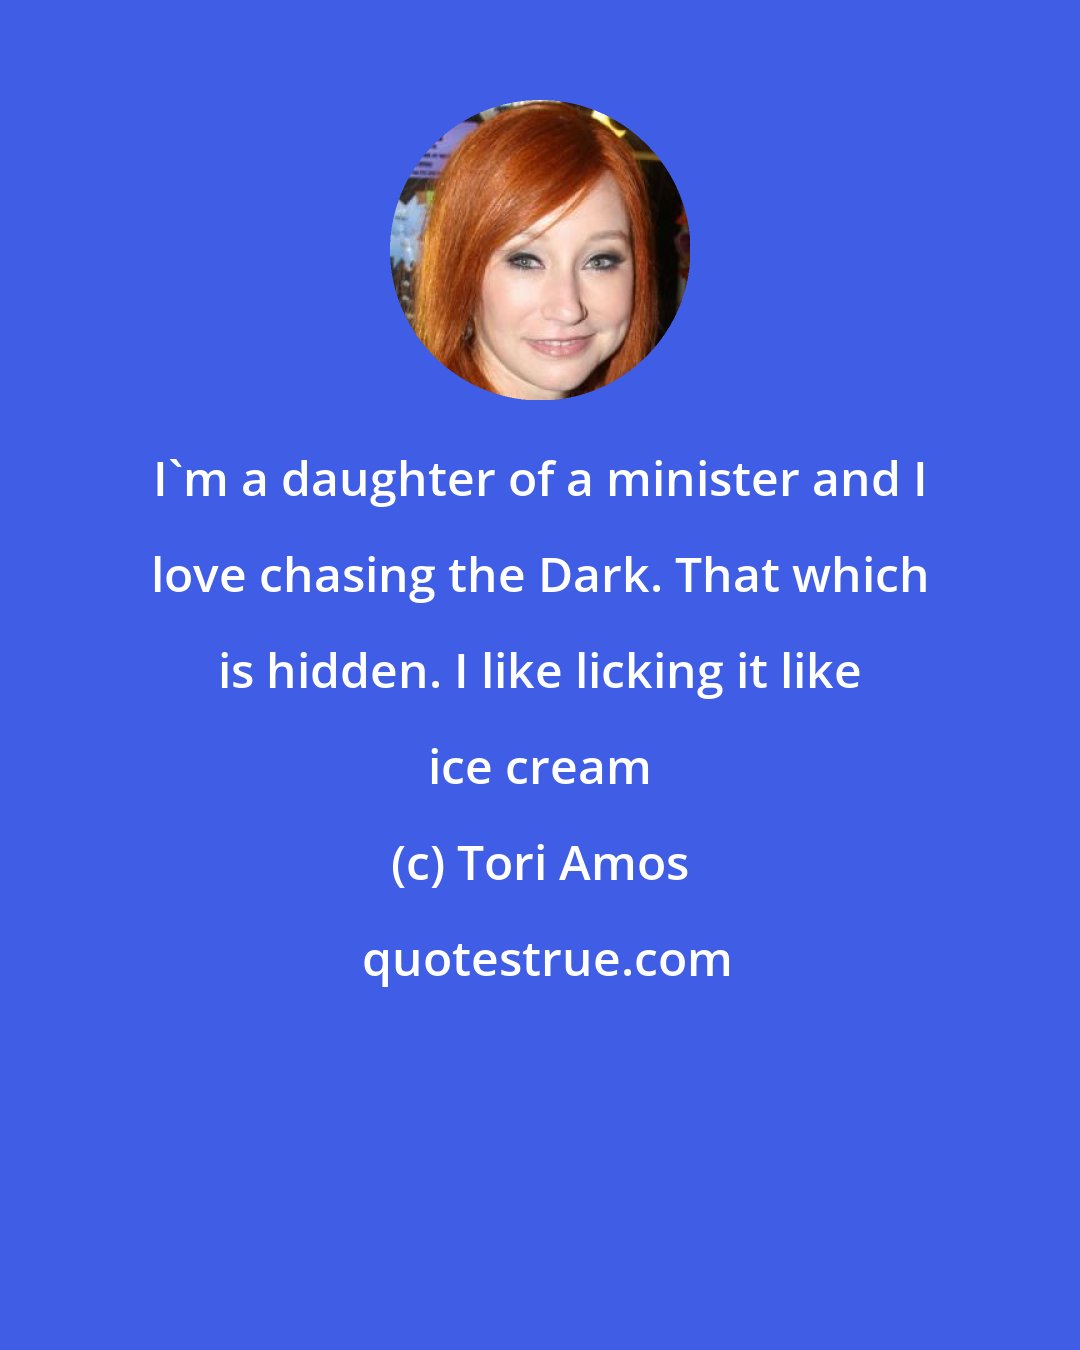 Tori Amos: I'm a daughter of a minister and I love chasing the Dark. That which is hidden. I like licking it like ice cream